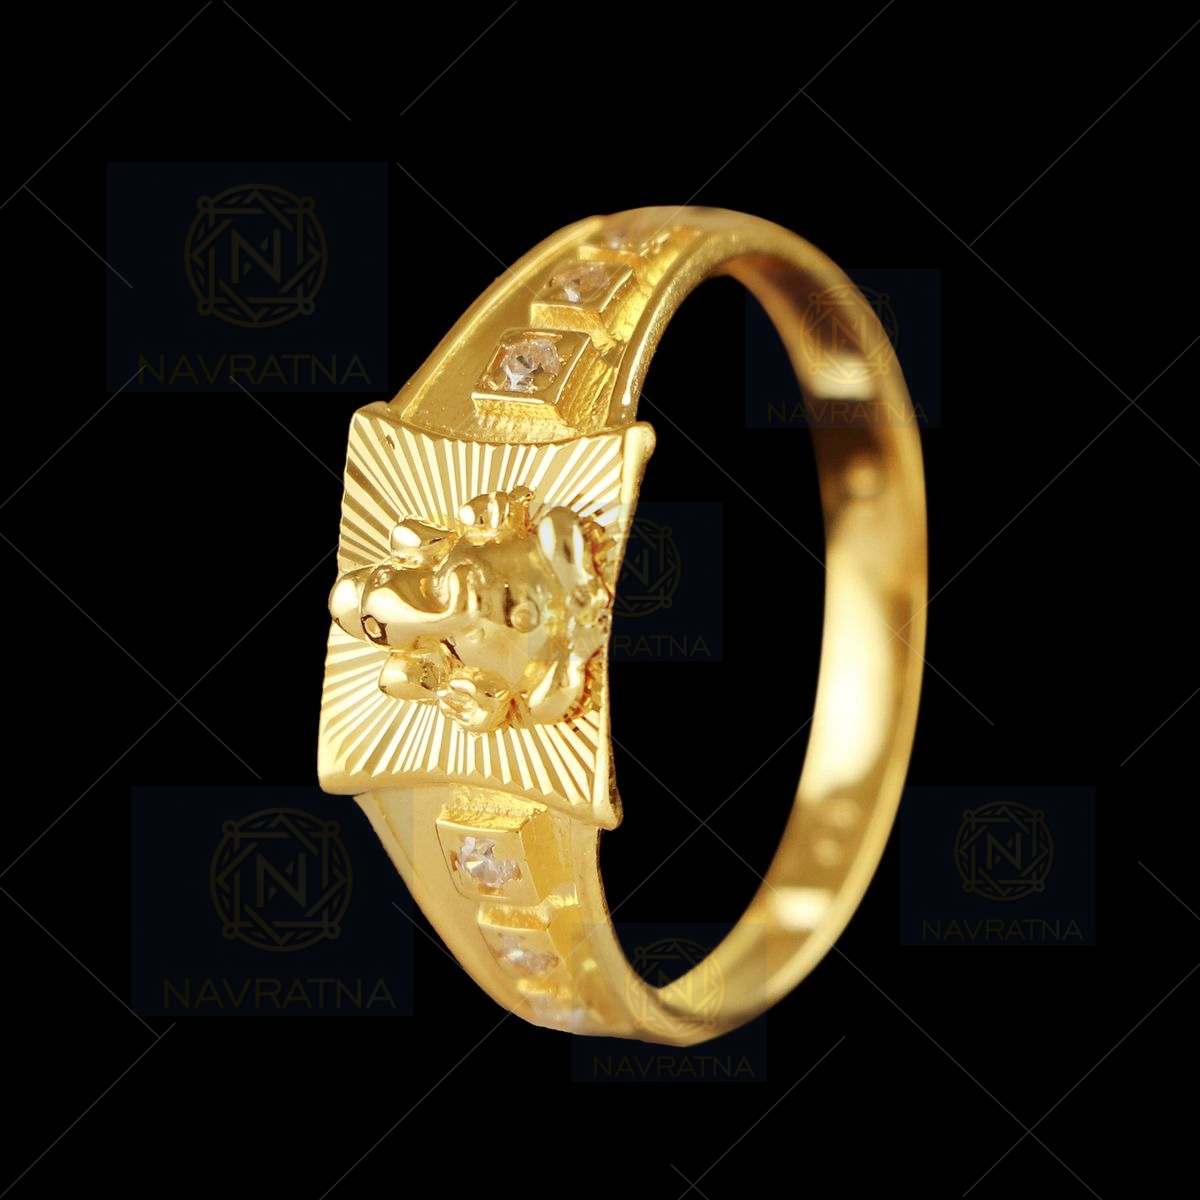 22k Gold Ganesha Ring - RiMs16518 - 22K gold religious ring for men's with  lord Ganesha embossed on top with machine cuts and matte fini